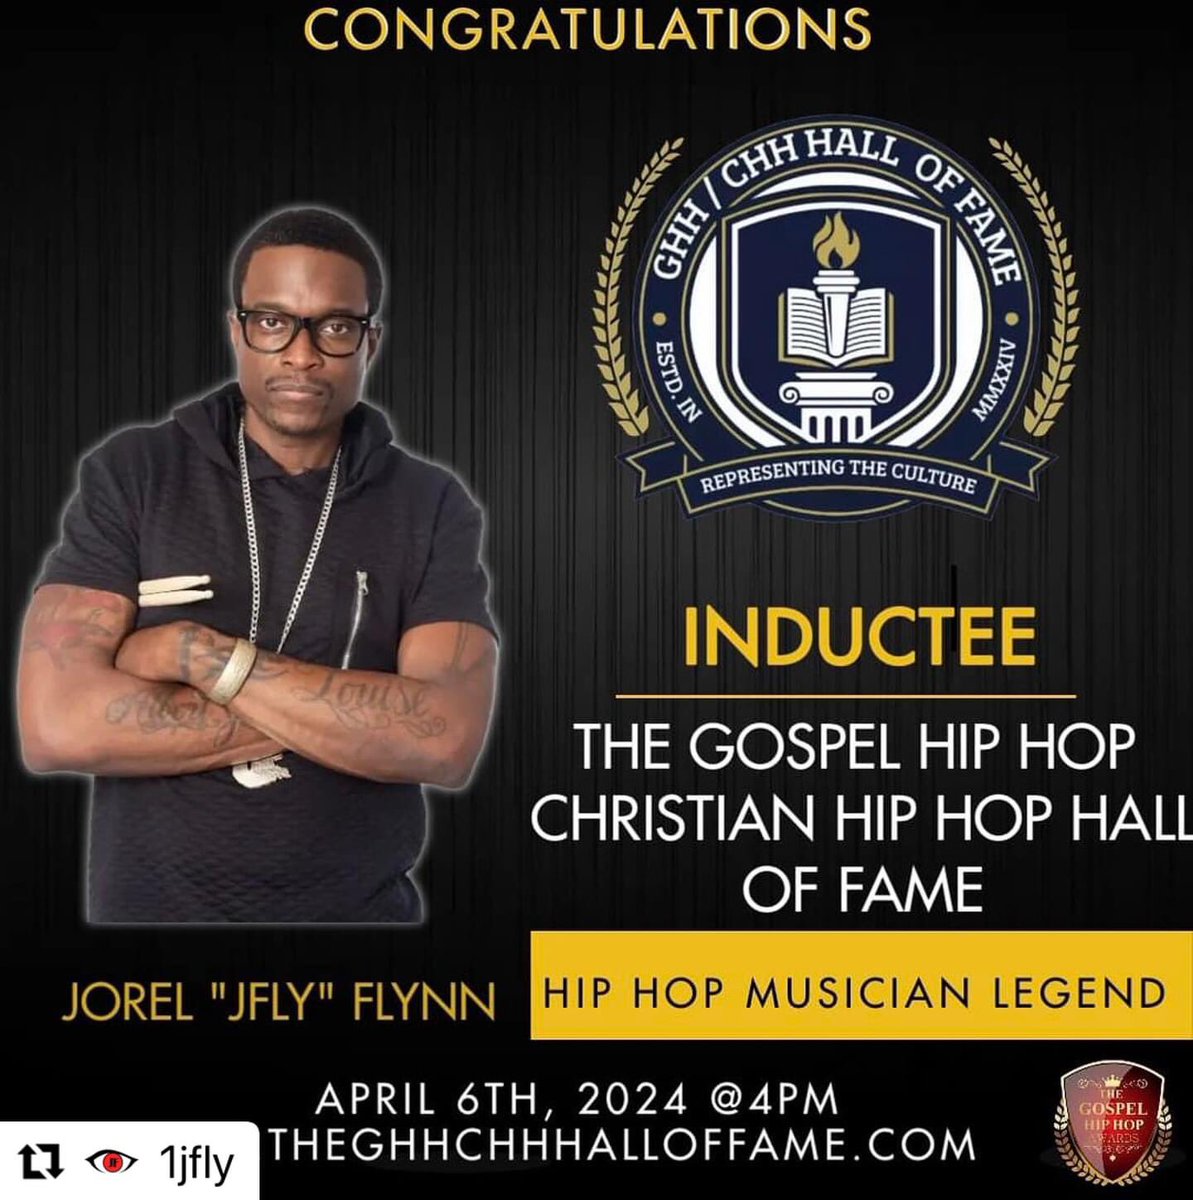 Congratulations to our very own, Musical Director, Drummer and friend @JFly The first Musician inductee to the “THE GOSPEL HIP HOP CHRISTIAN HIP HOP HALL OF FAME.” #musiclovers #drums#honor #dreamscometrue #jflymusic